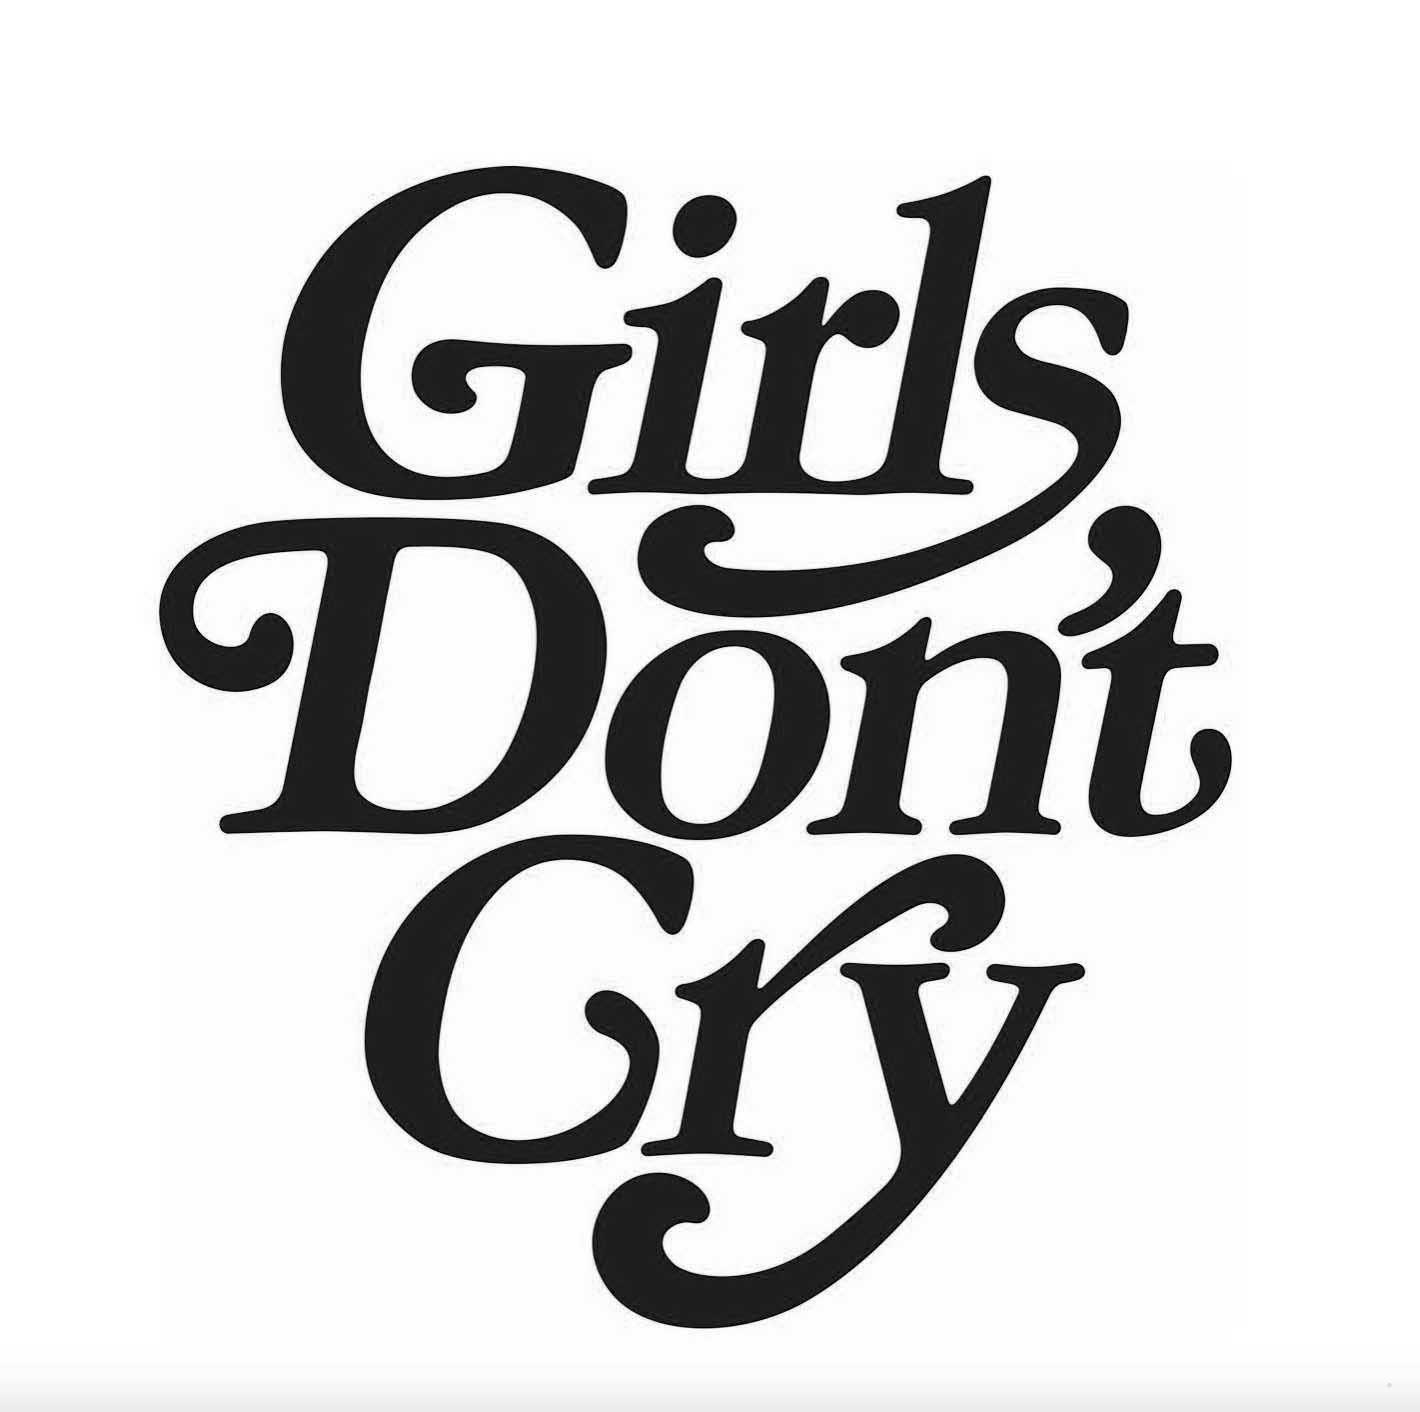 GIRLS DON'T CRY